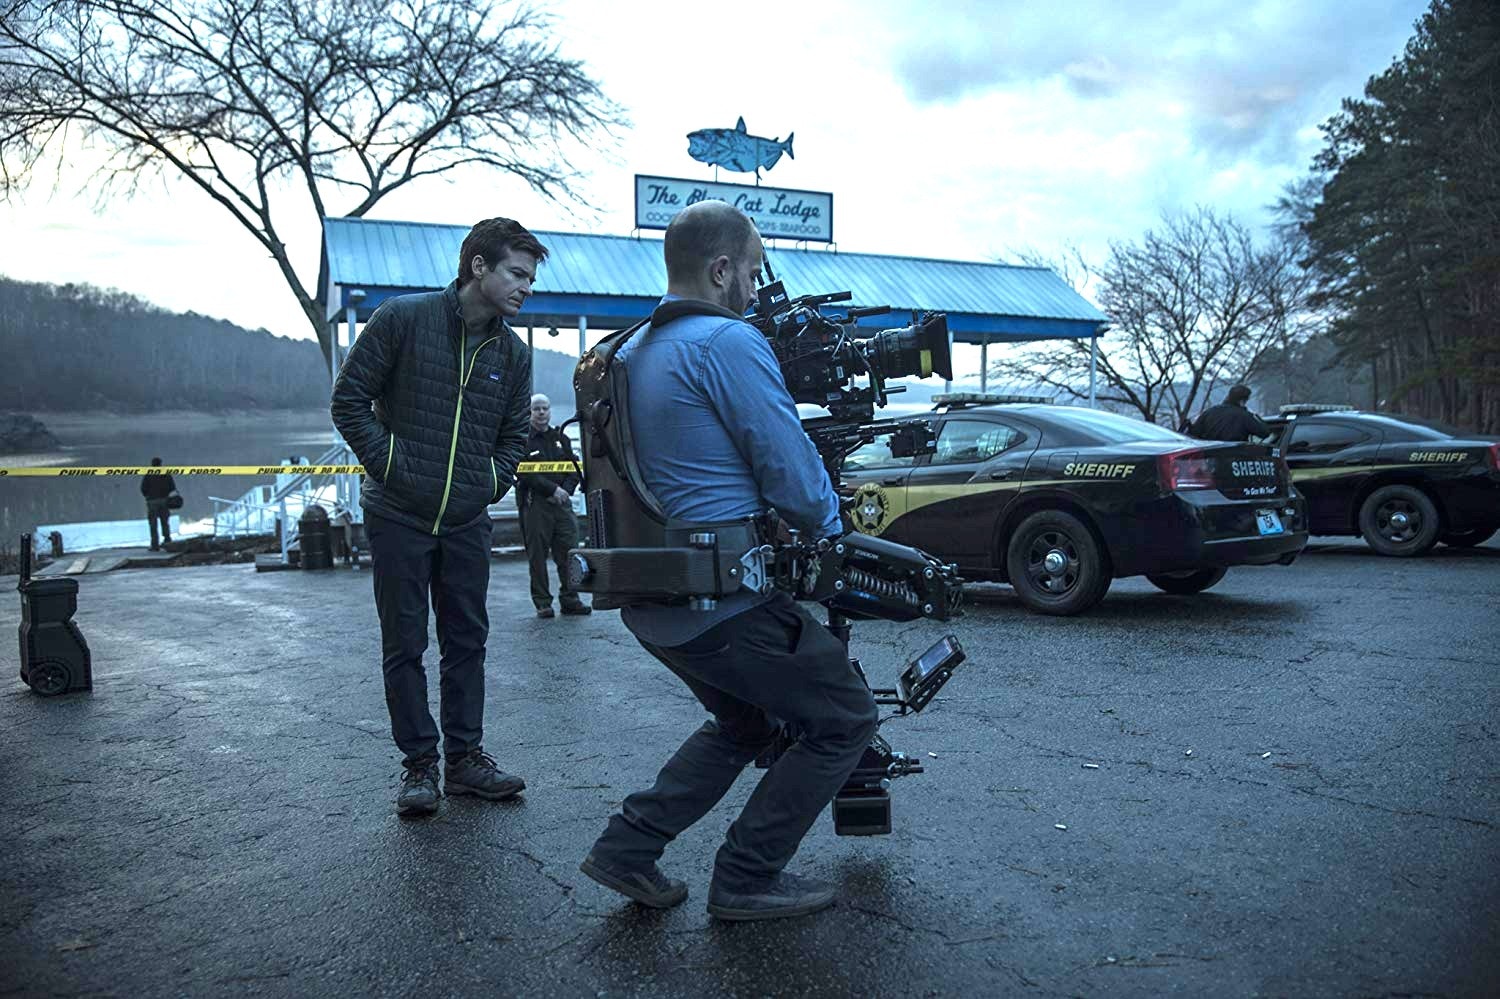 Fans of Netflix's Ozark can check out these filming locations in